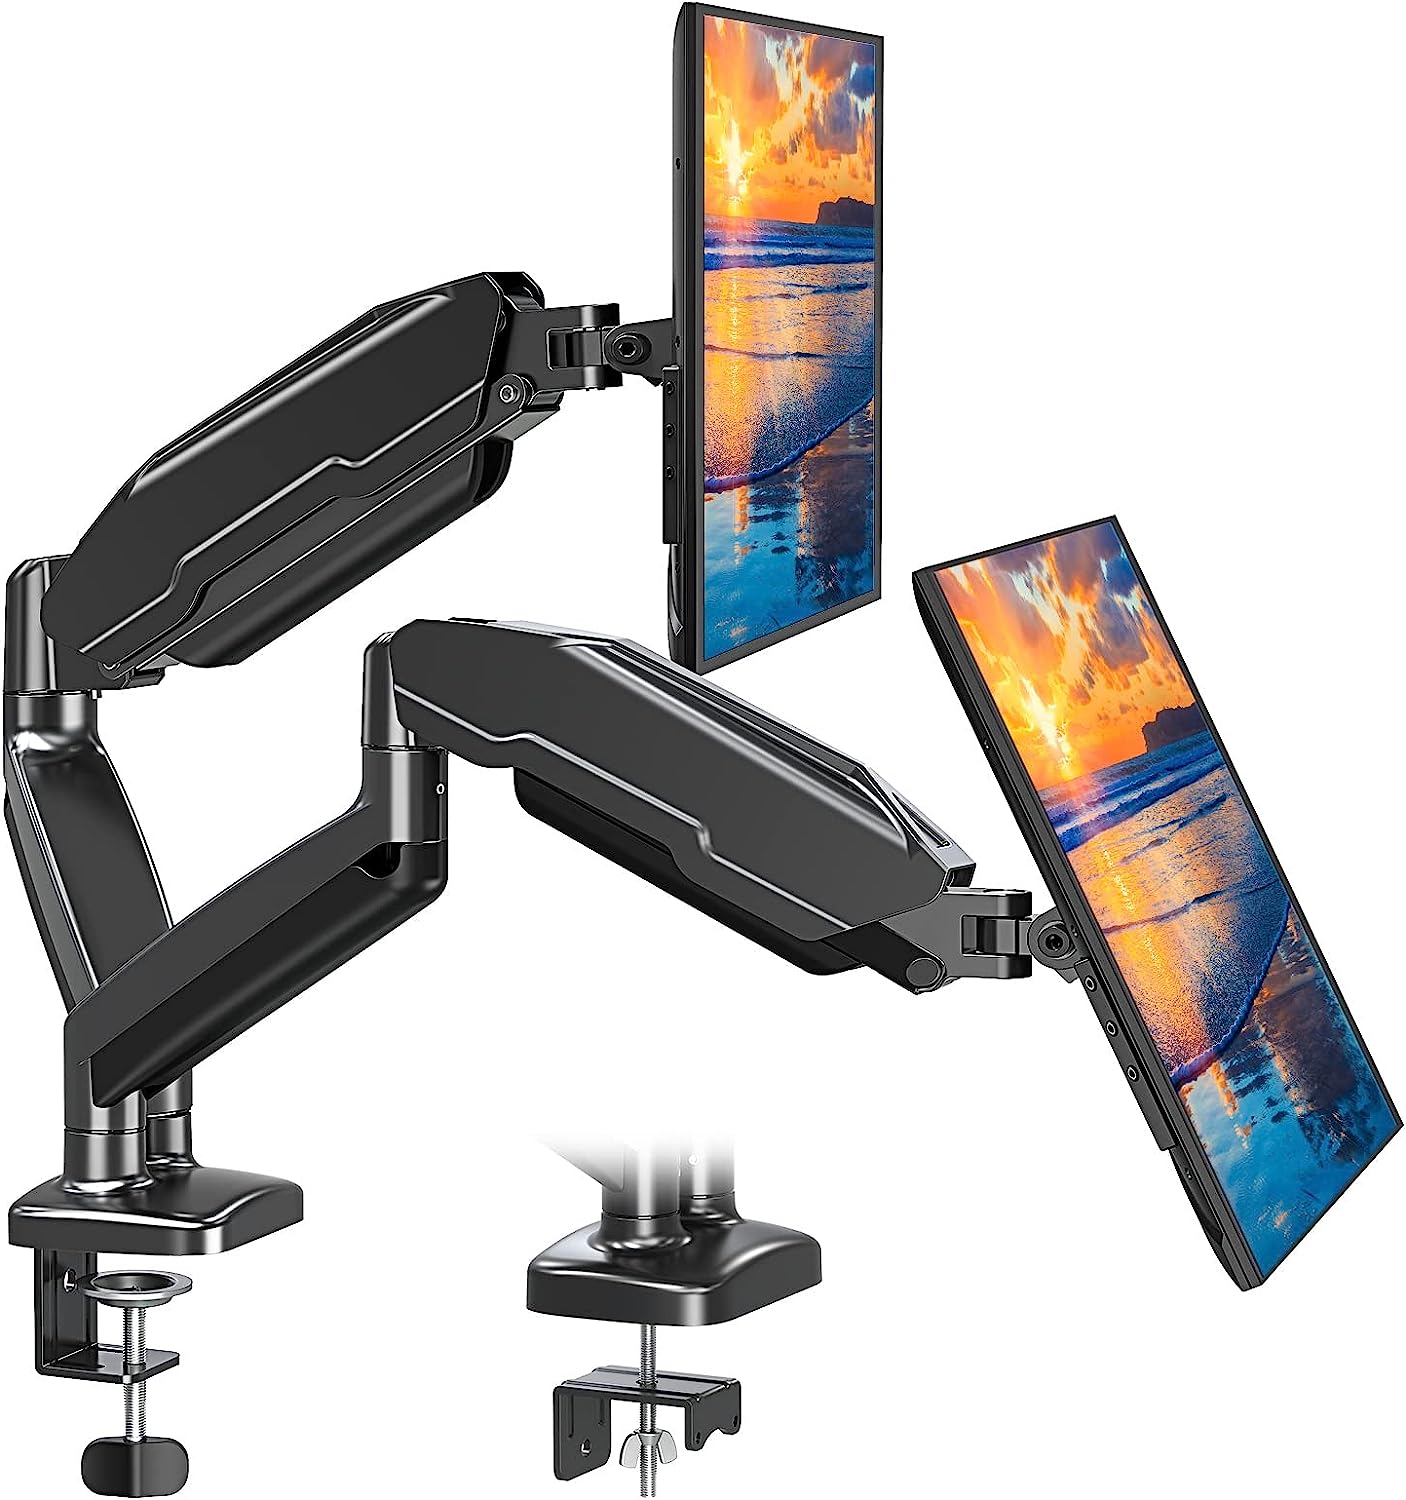 MOUNT PRO Dual Monitor Mount Fits 13 to 32 Inch [...]